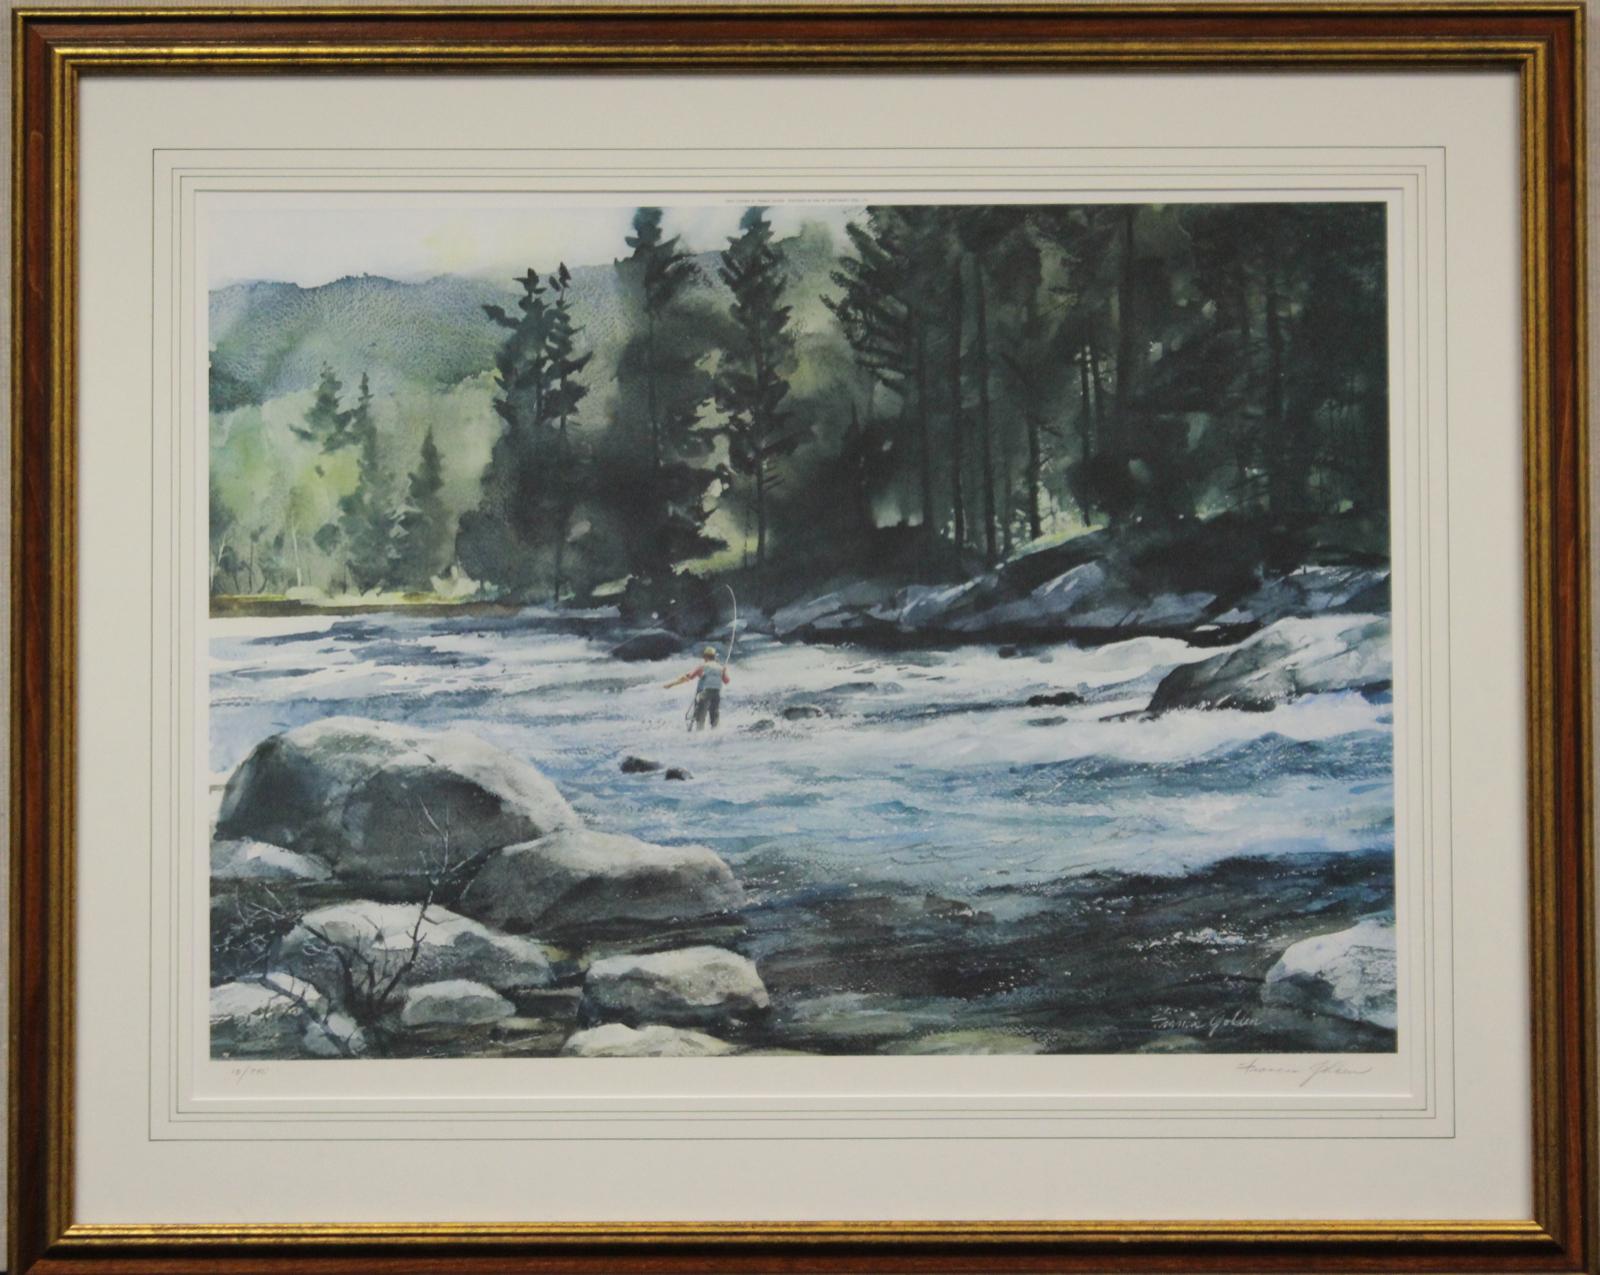 "Trout Fishing" 1980 - Print by Francis Golden